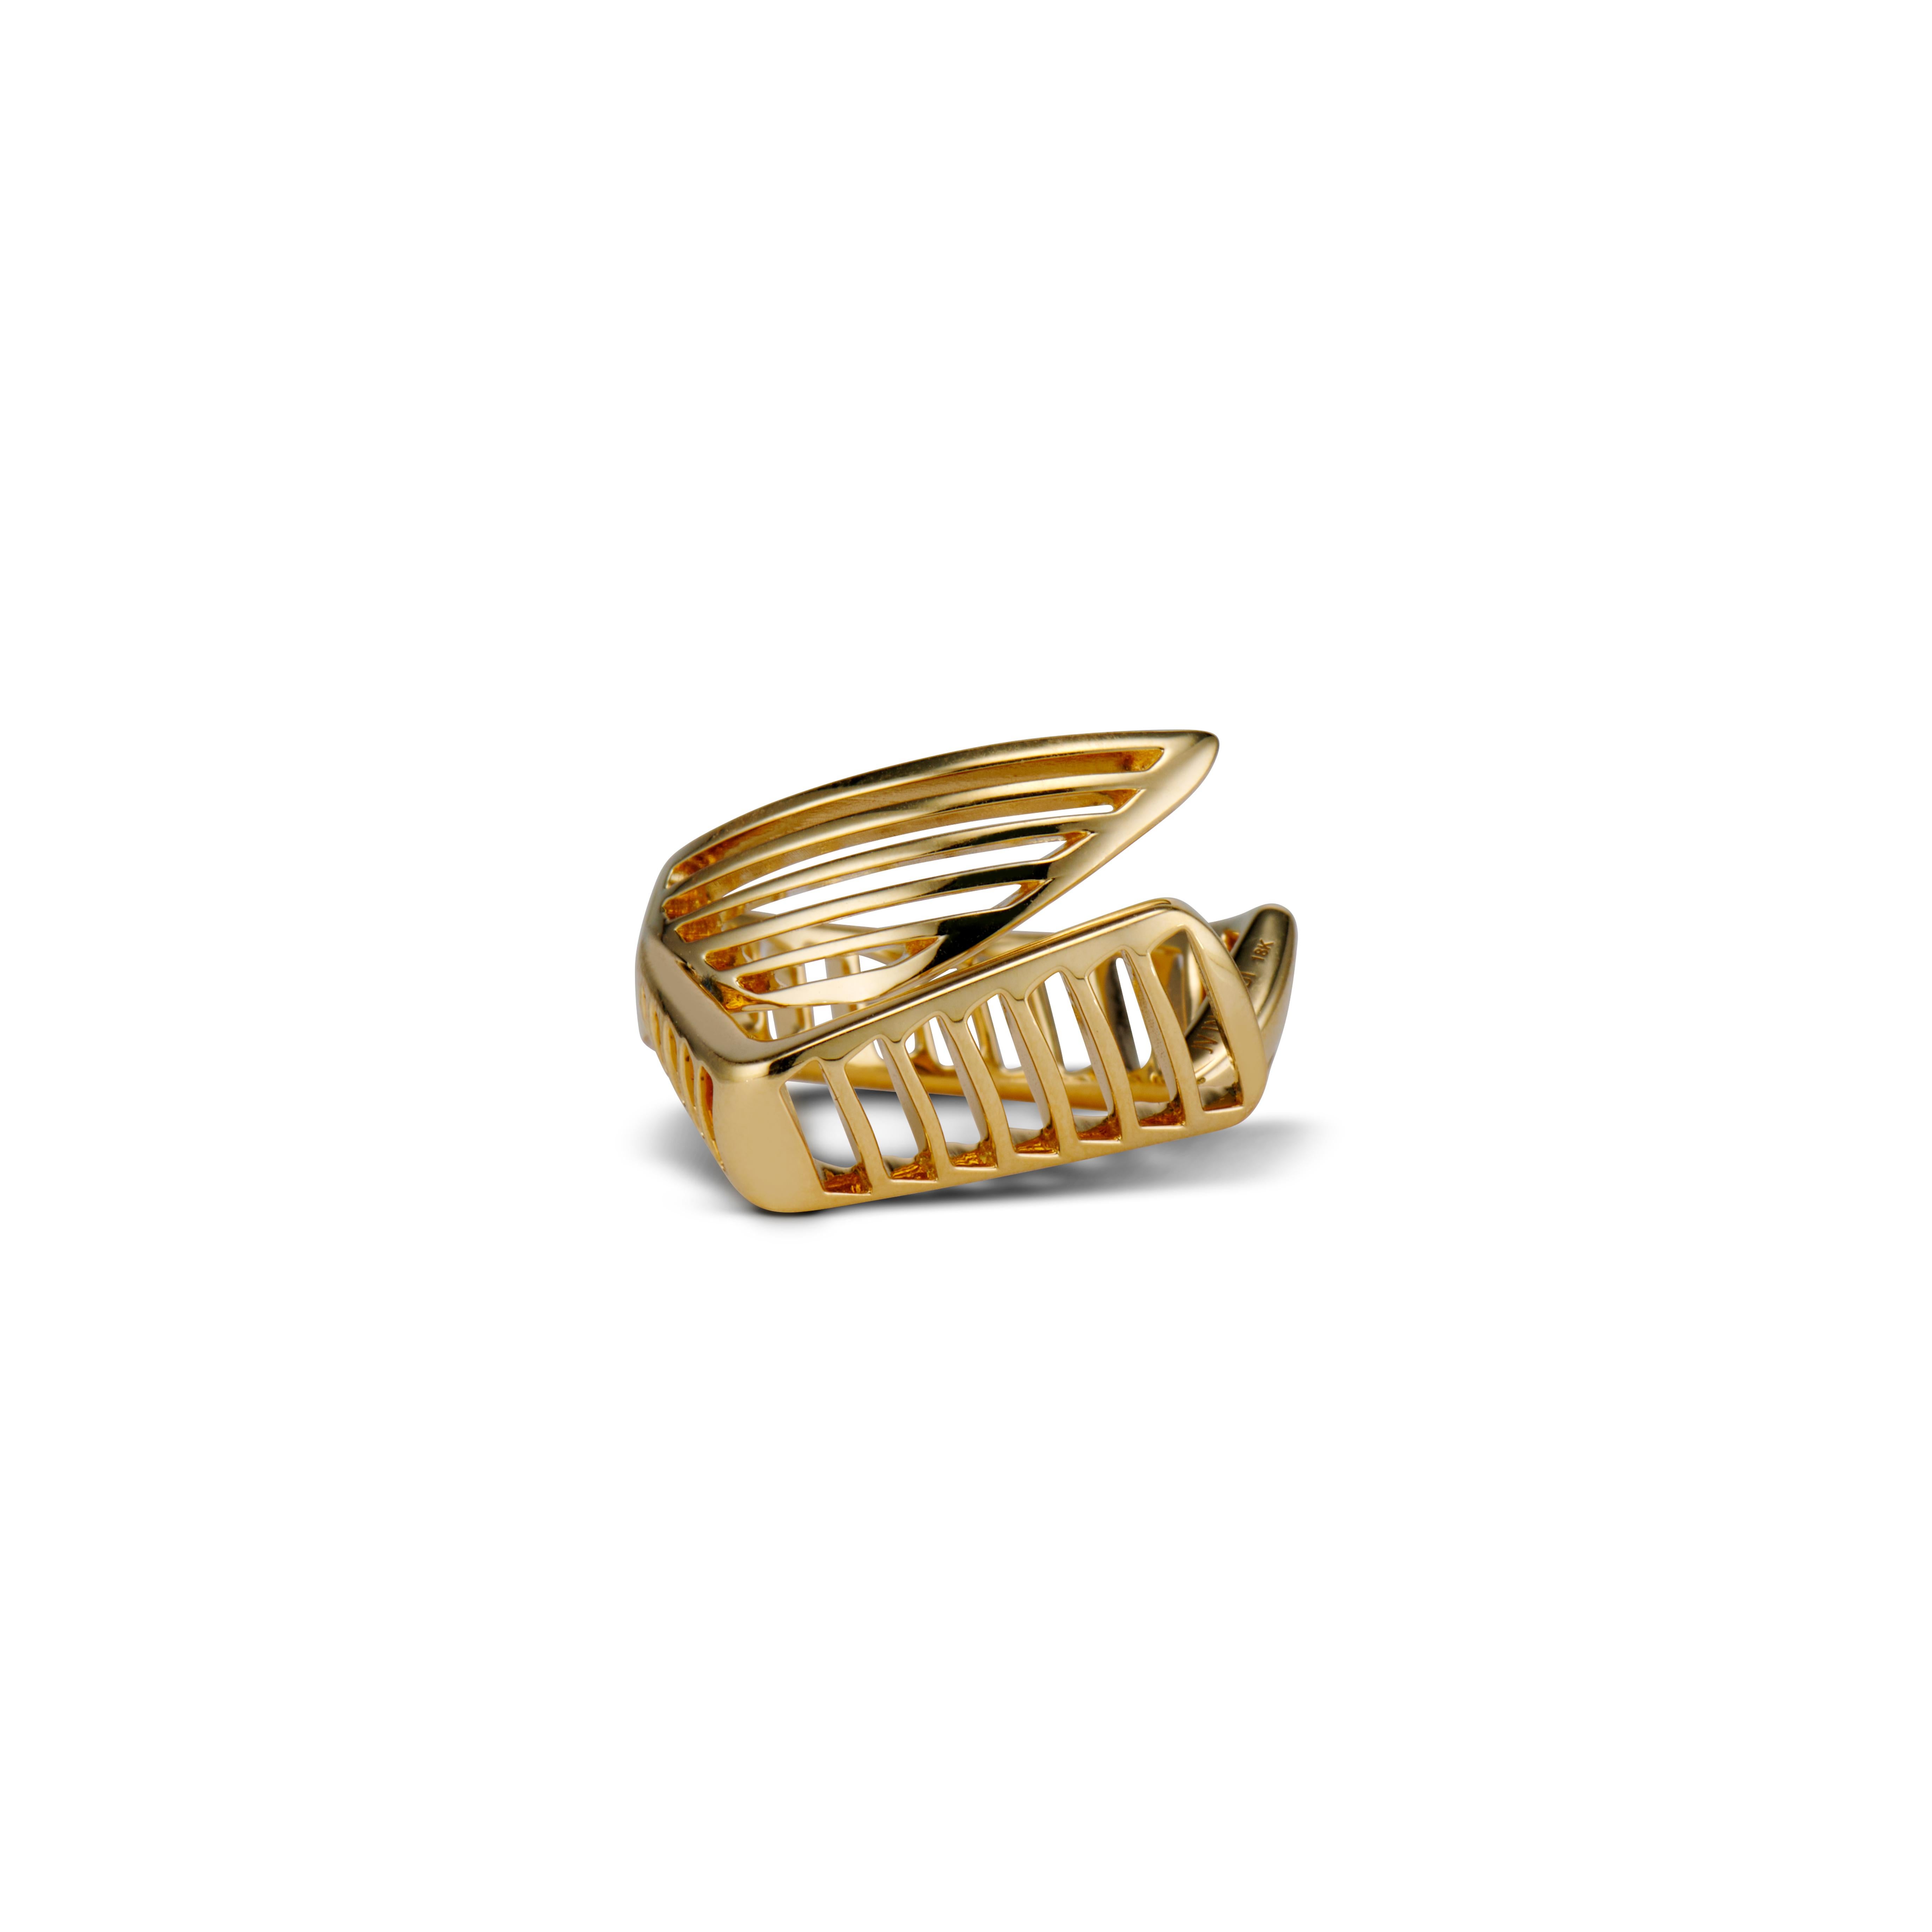 The FENESTRA AFFINITY ring symbolizes the allure of embracing an open heart. Every architectural cut-out within the ring serves as a portal for fresh opportunities to flow into your life. Crafted from solid 18kt yellow gold, the AFFINITY ring